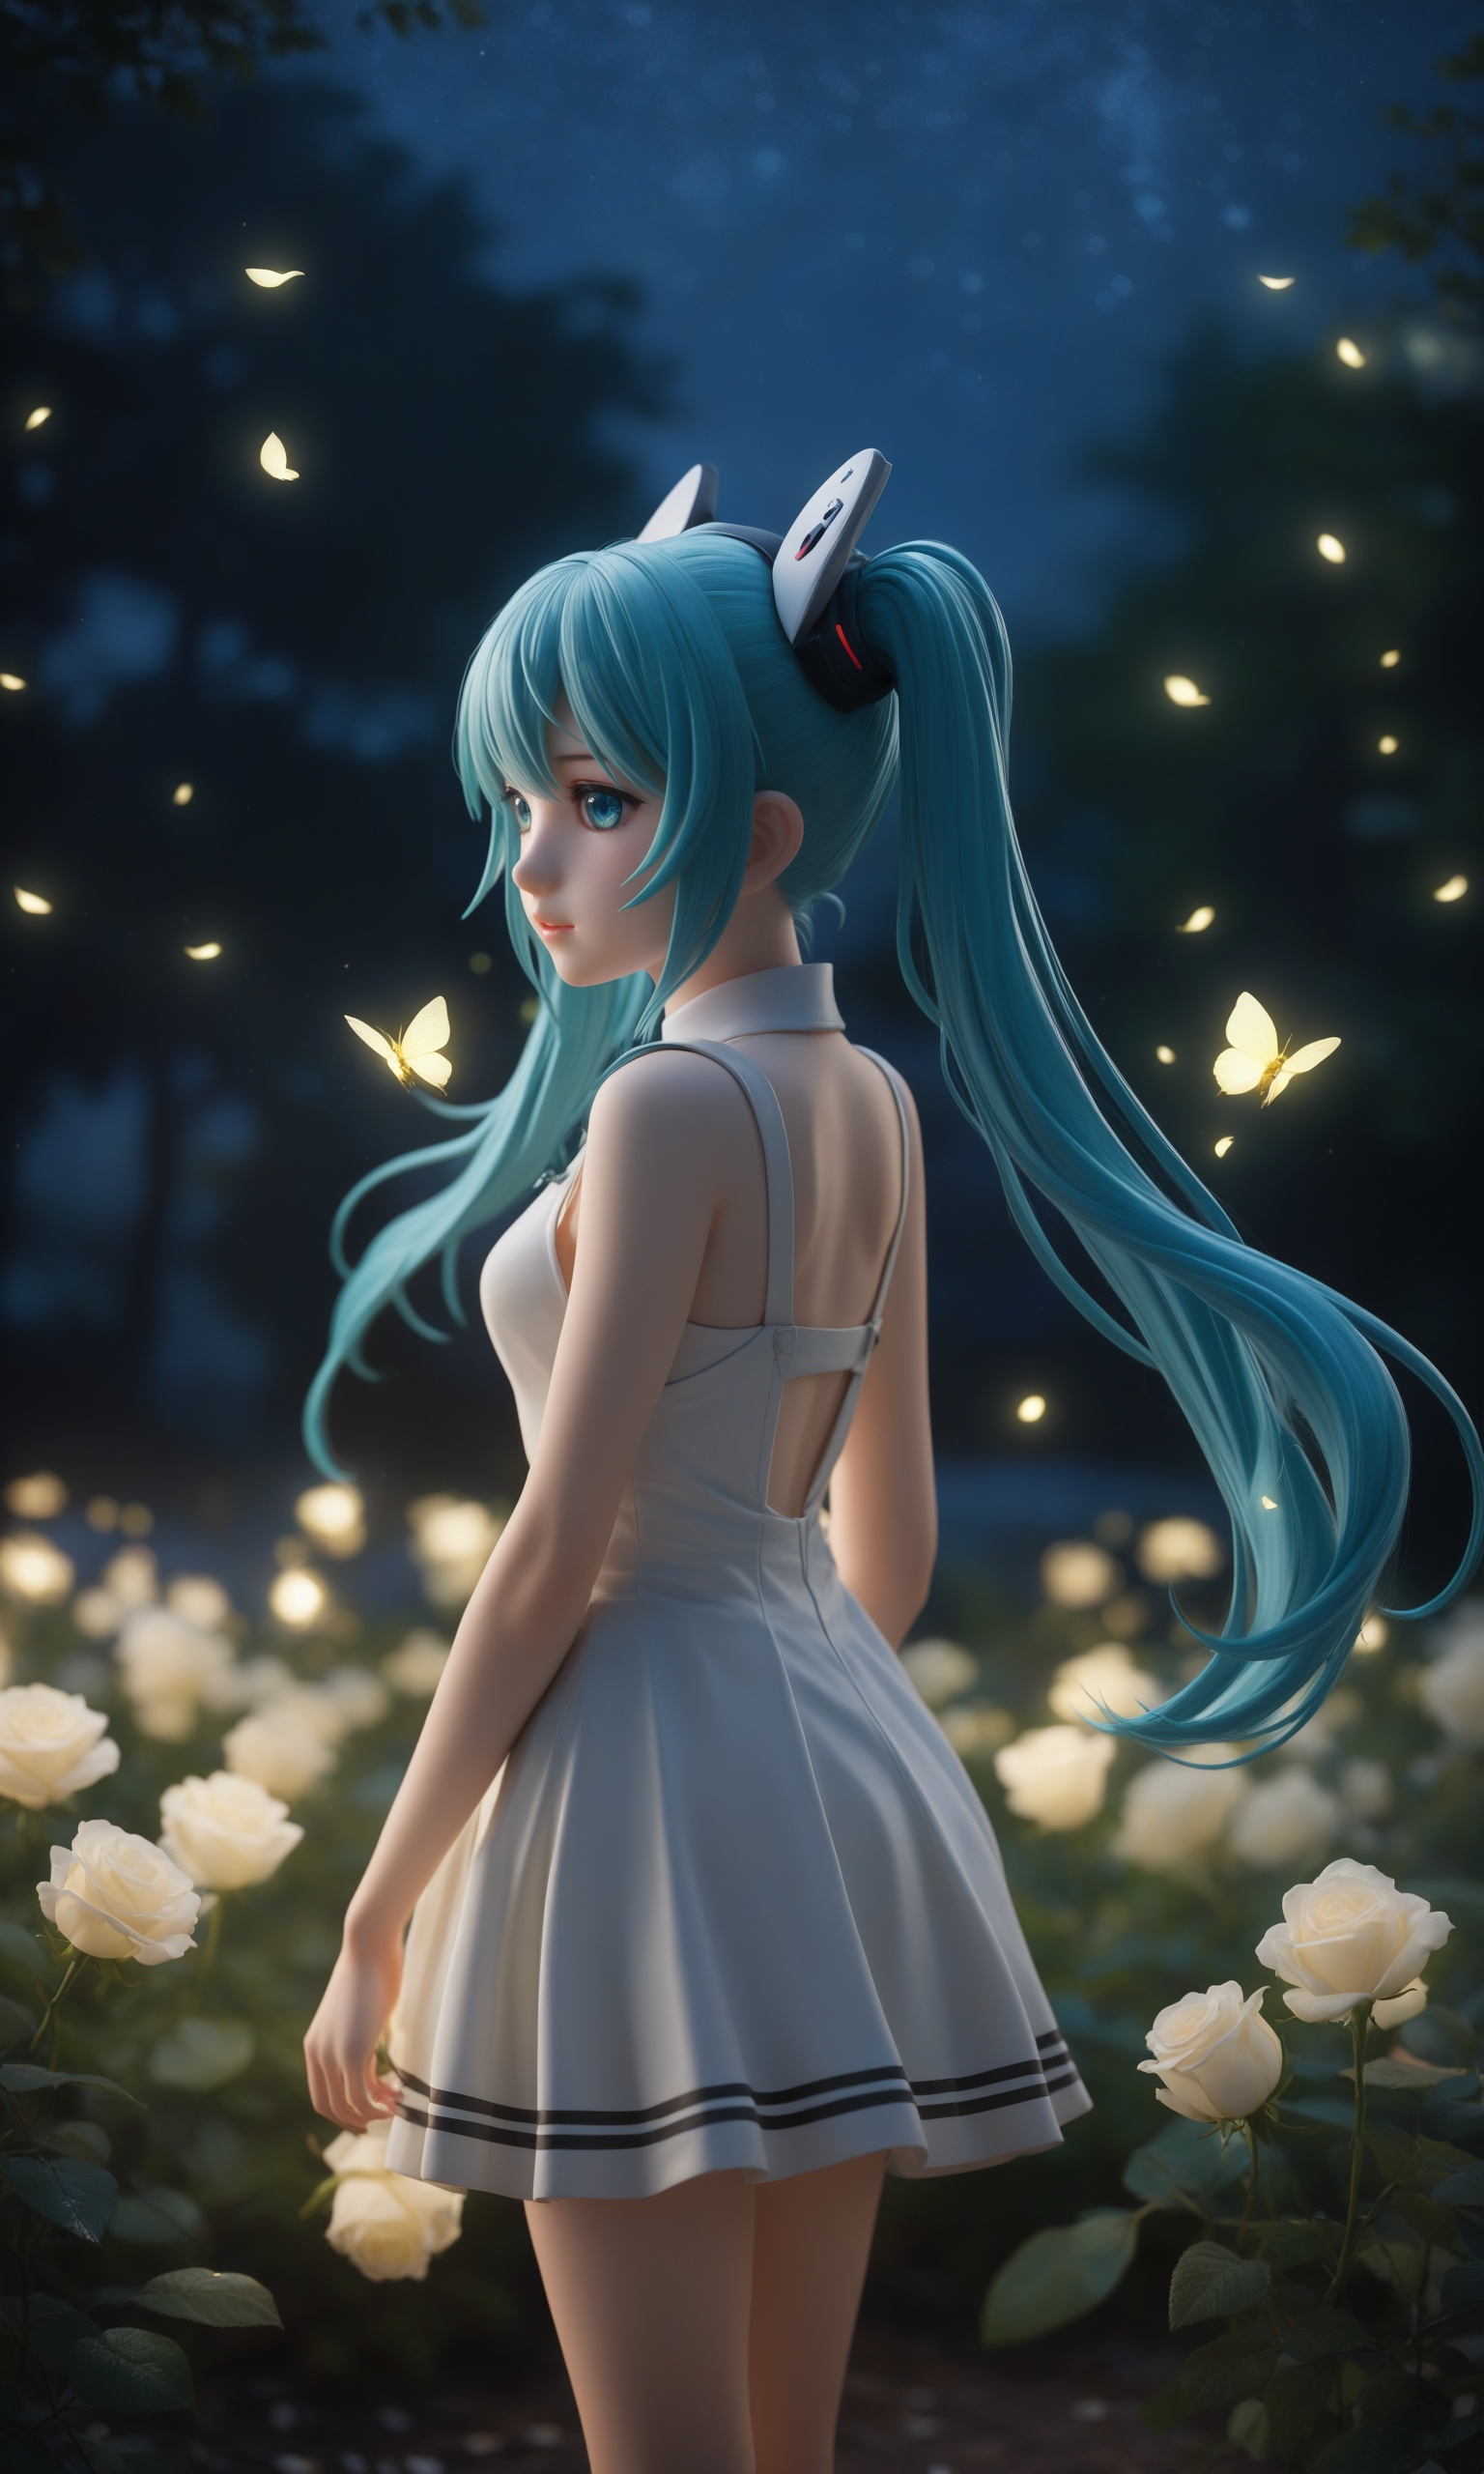 Realistic,Masterpiece,18 - year - old,solo,face focus,masterpiece,best quality,1girl,hatsune miku,white roses,petals,night background,fireflies,light particle,solo,aqua hair with twin tails,aqua eyes,standing,pixiv,depth of field,cinematic composition,best lighting,looking up,